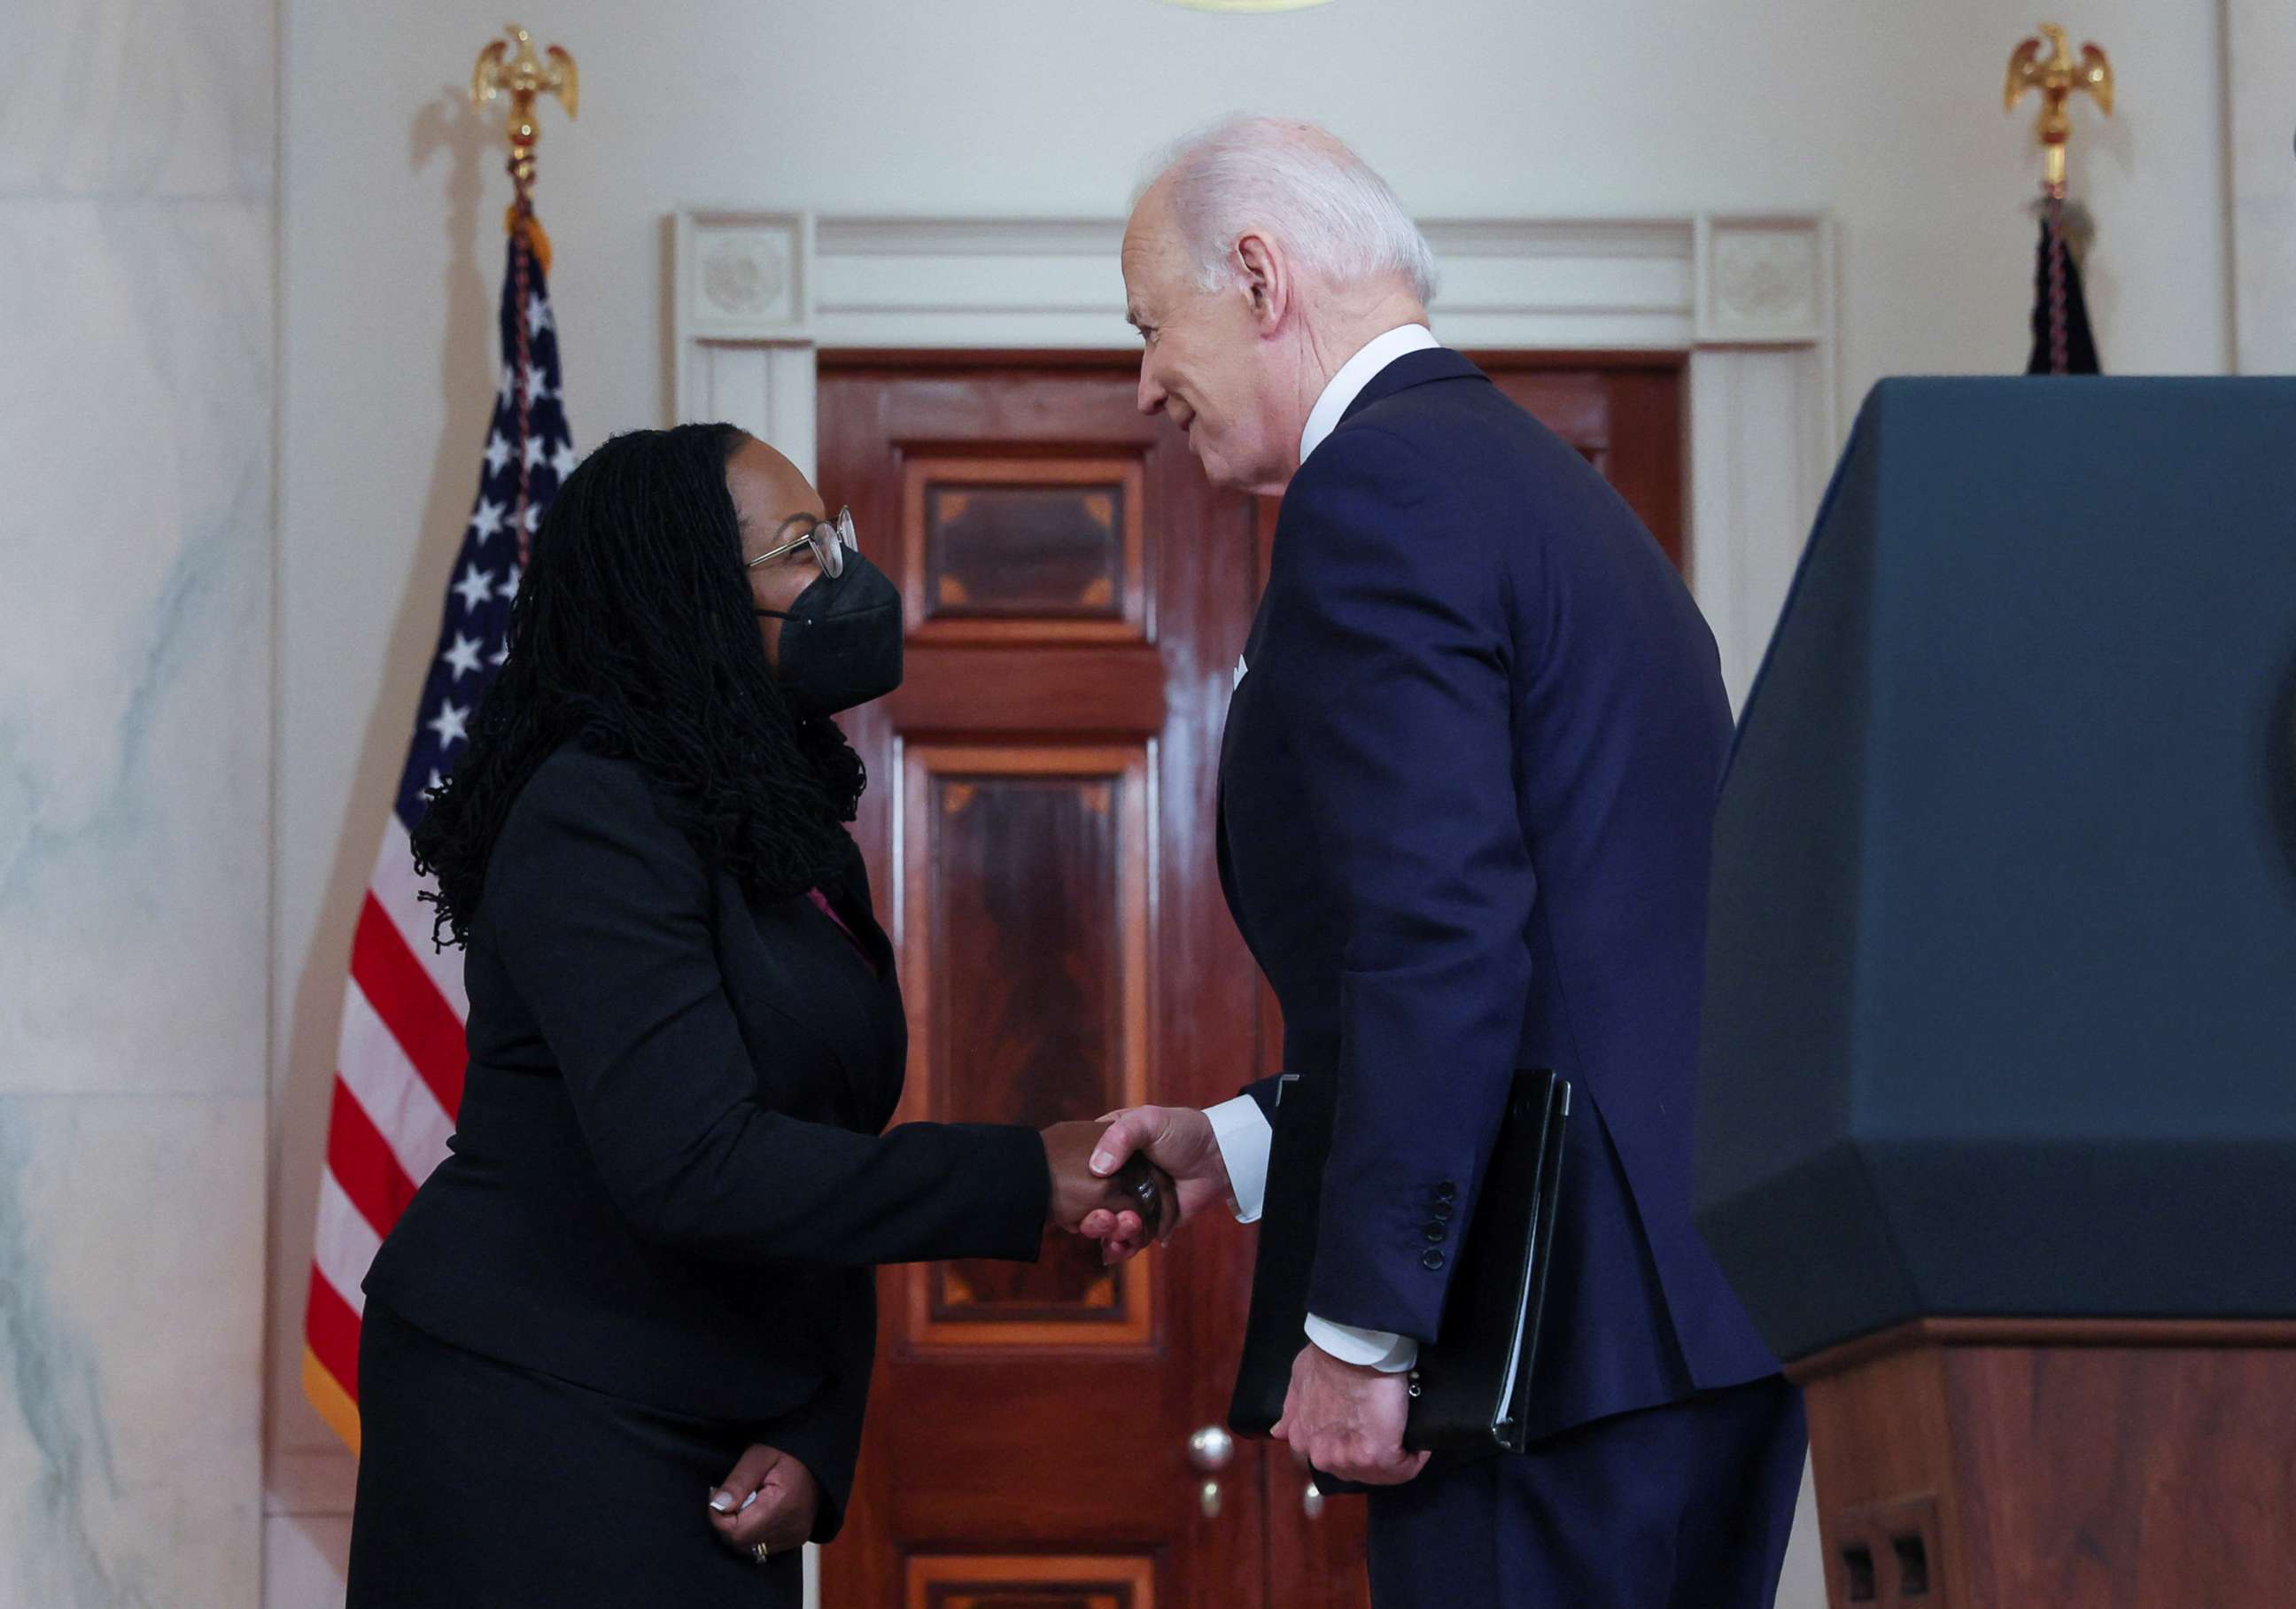 PHOTO:President Joe Biden shakes hands with U.S. Appeals Court Judge Ketanji Brown Jackson after announcing her as his nominee to be a Supreme Court Associate Justice and the first Black woman to serve on the court, at the White House, Feb. 25, 2022.